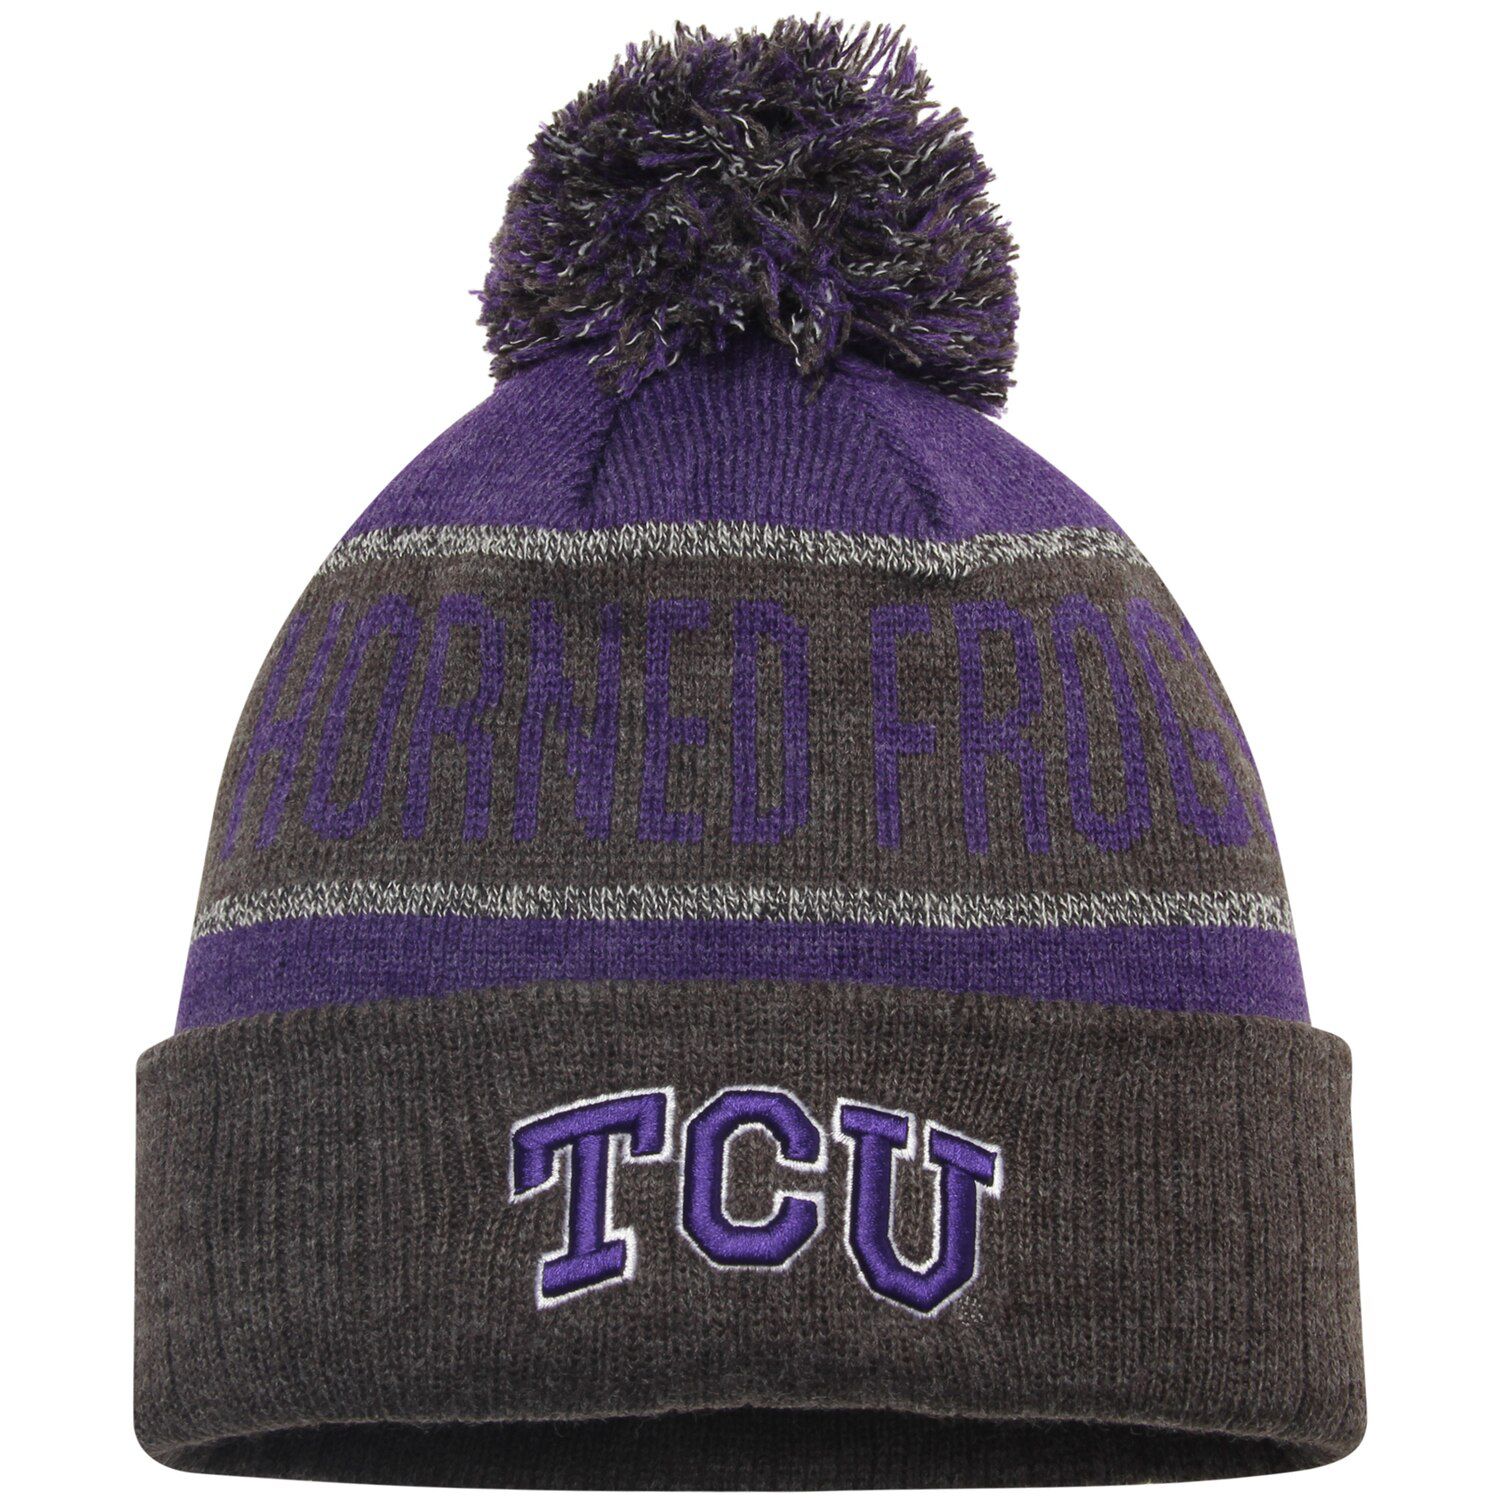 Image for Unbranded Youth Top of the World Purple TCU Horned Frogs Below Zero Cuffed Knit Hat With Pom at Kohl's.